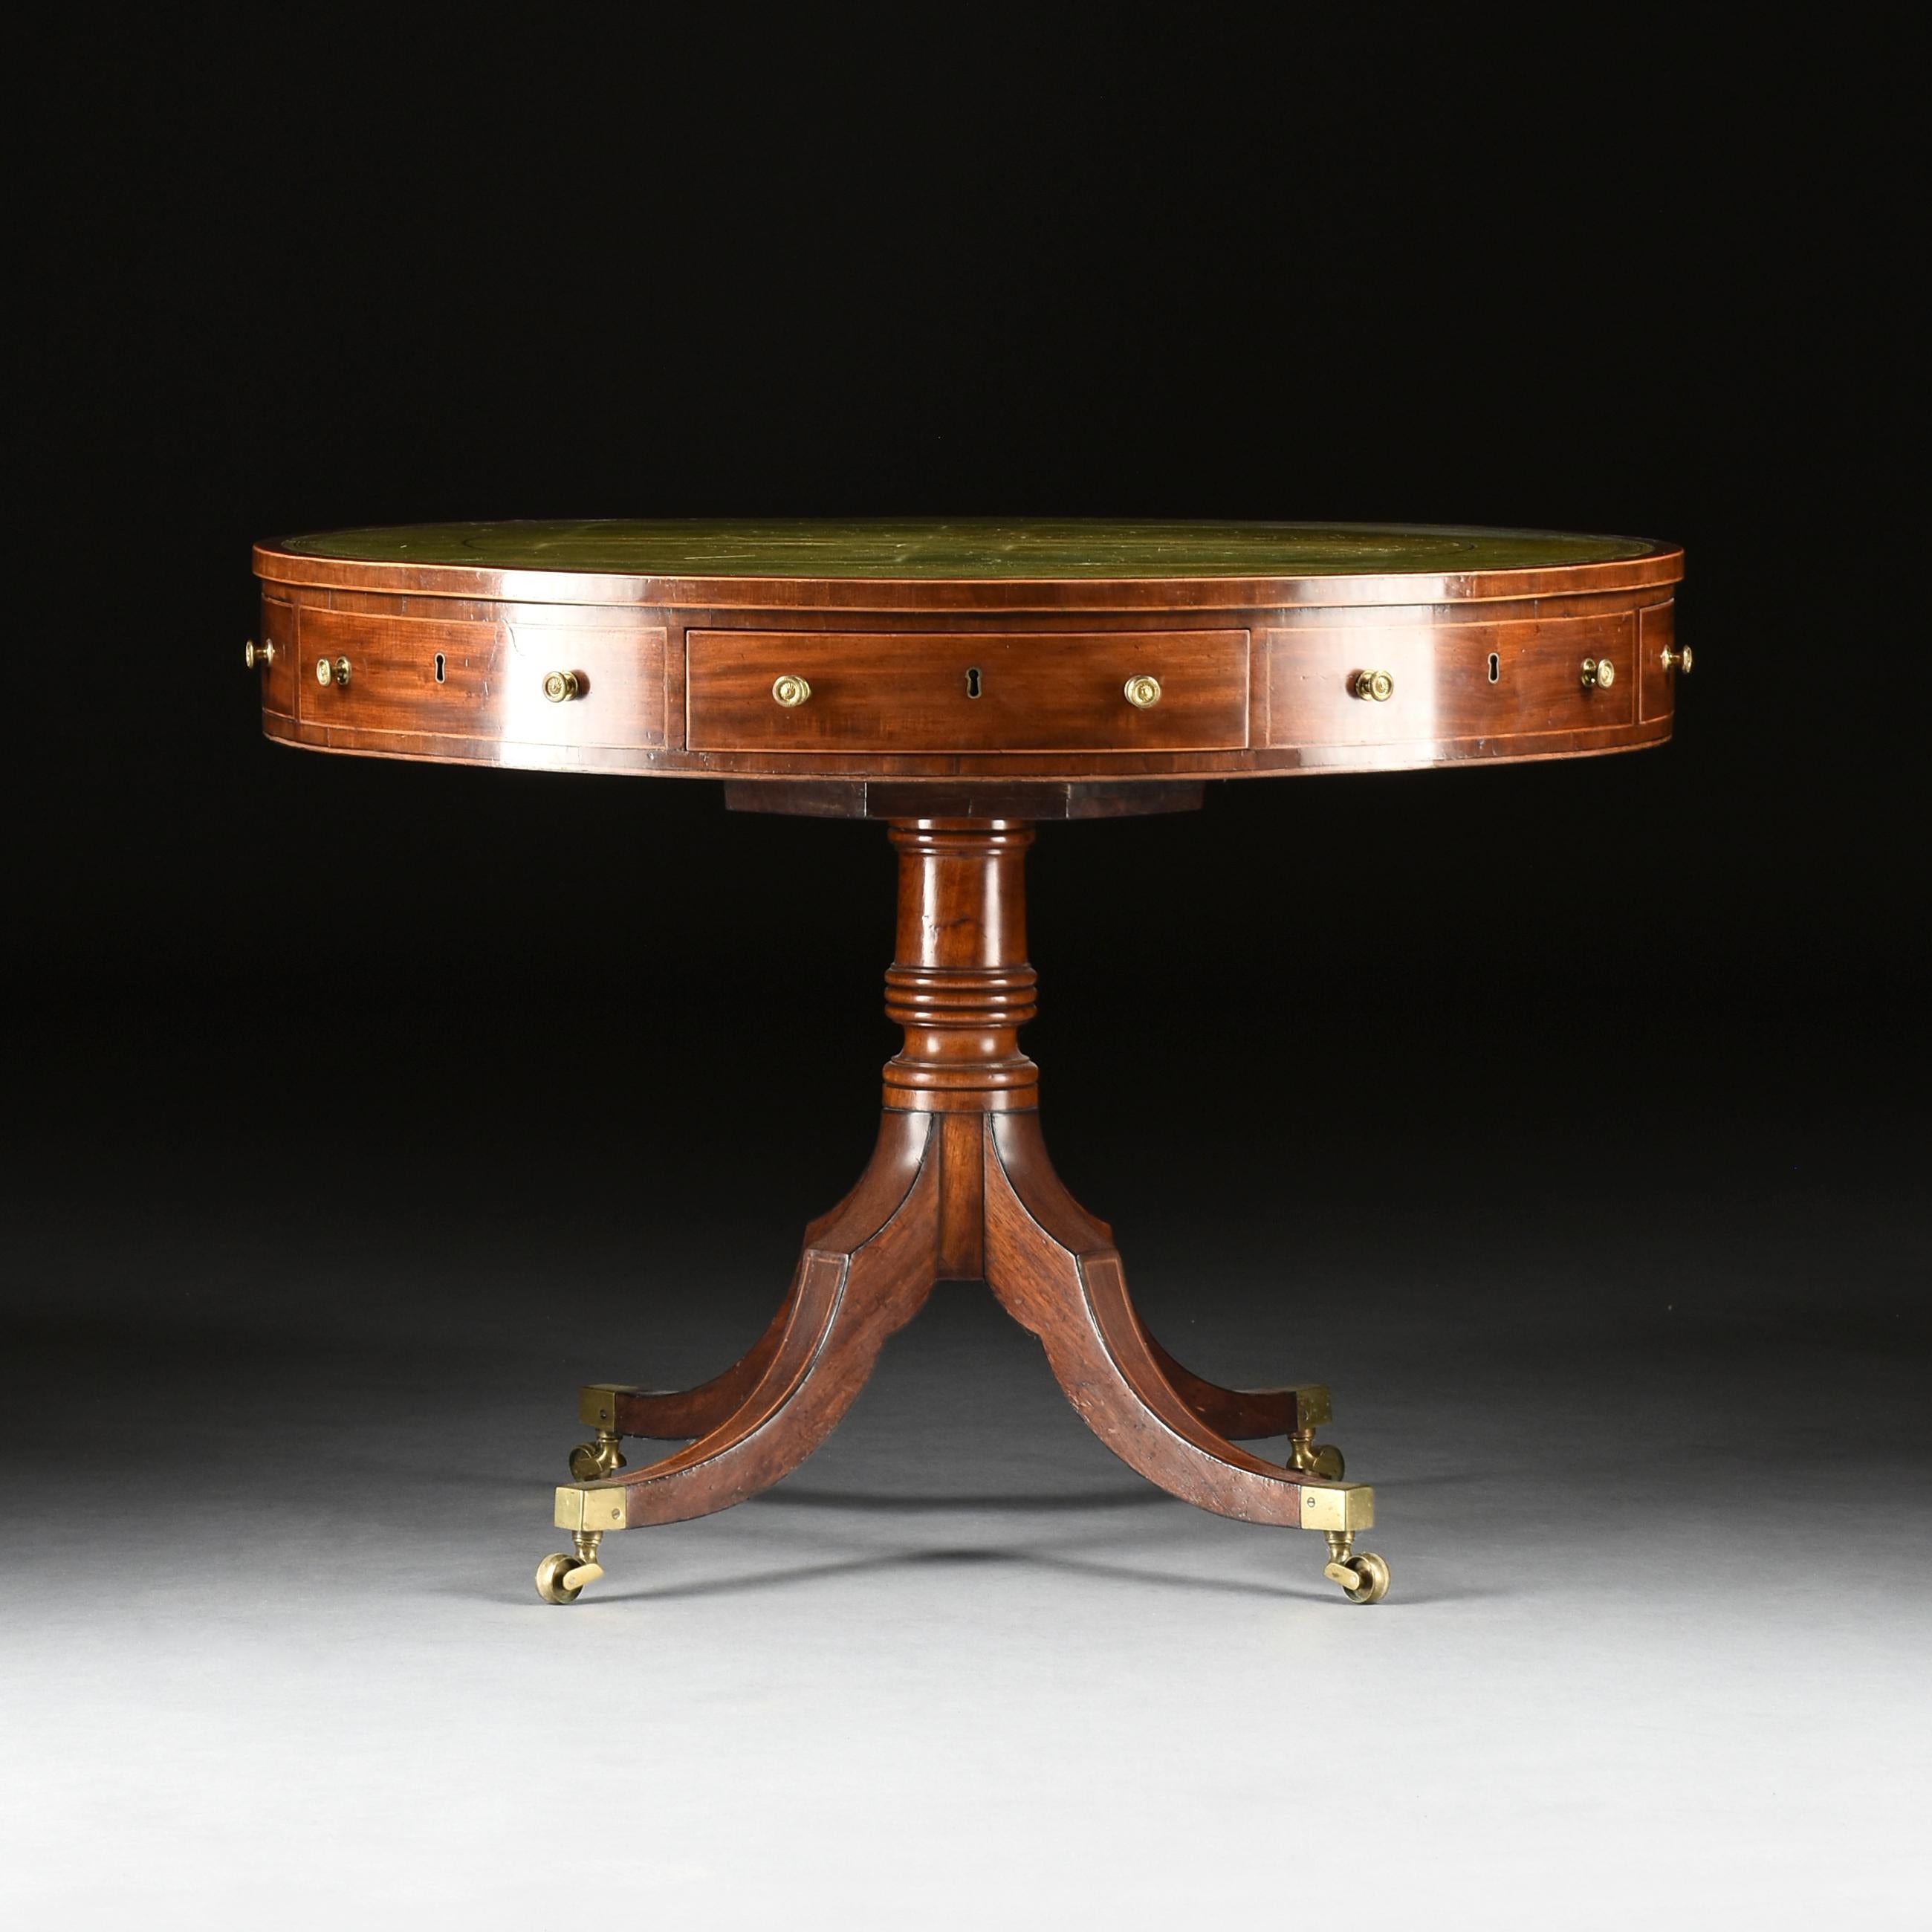 Circular top with green tooled leather and crossbanded edge. Turned support joined by four square section saber legs ending on plain brass cup casters.